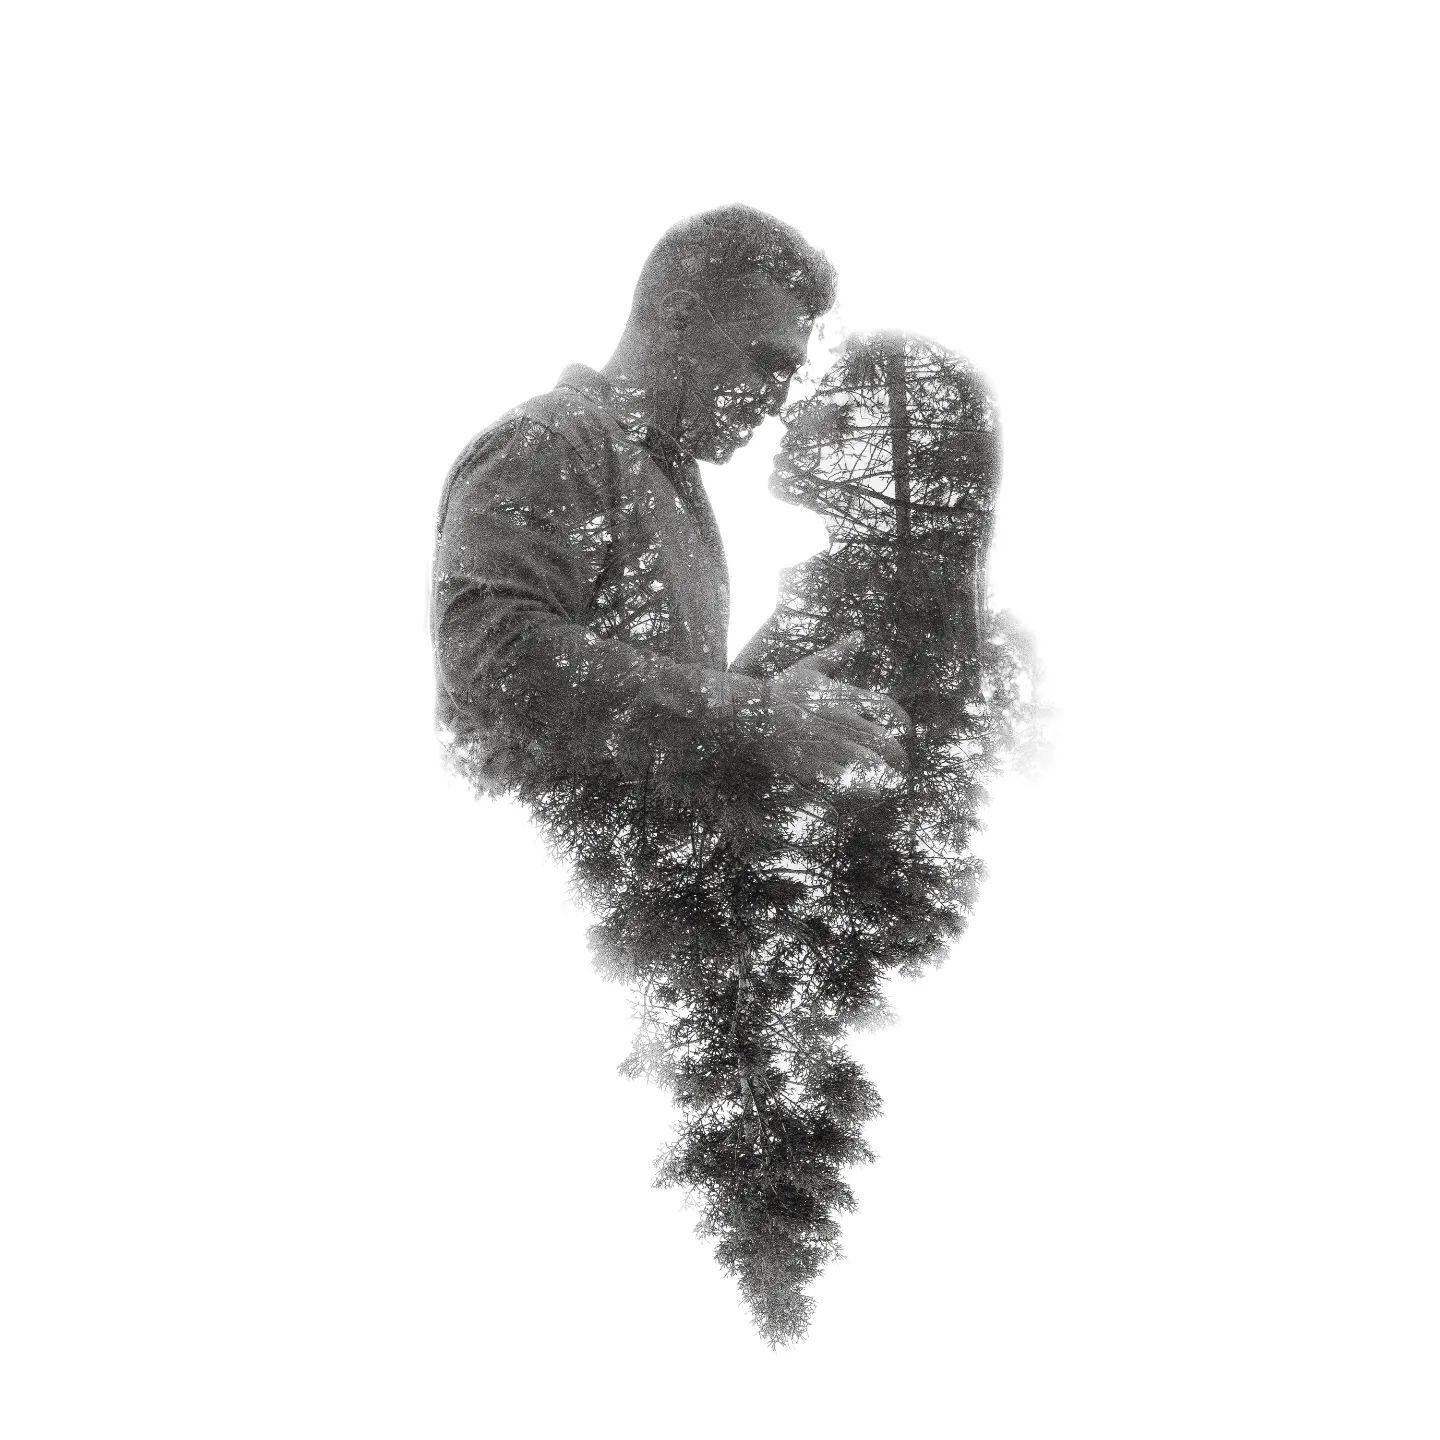 Taking a double exposure photo from the camera is not always possible if you do not have the necessary elements for it.  Sometimes the light is not adequate, the contrast between the couple and the background is not ideal, or there are not interestin